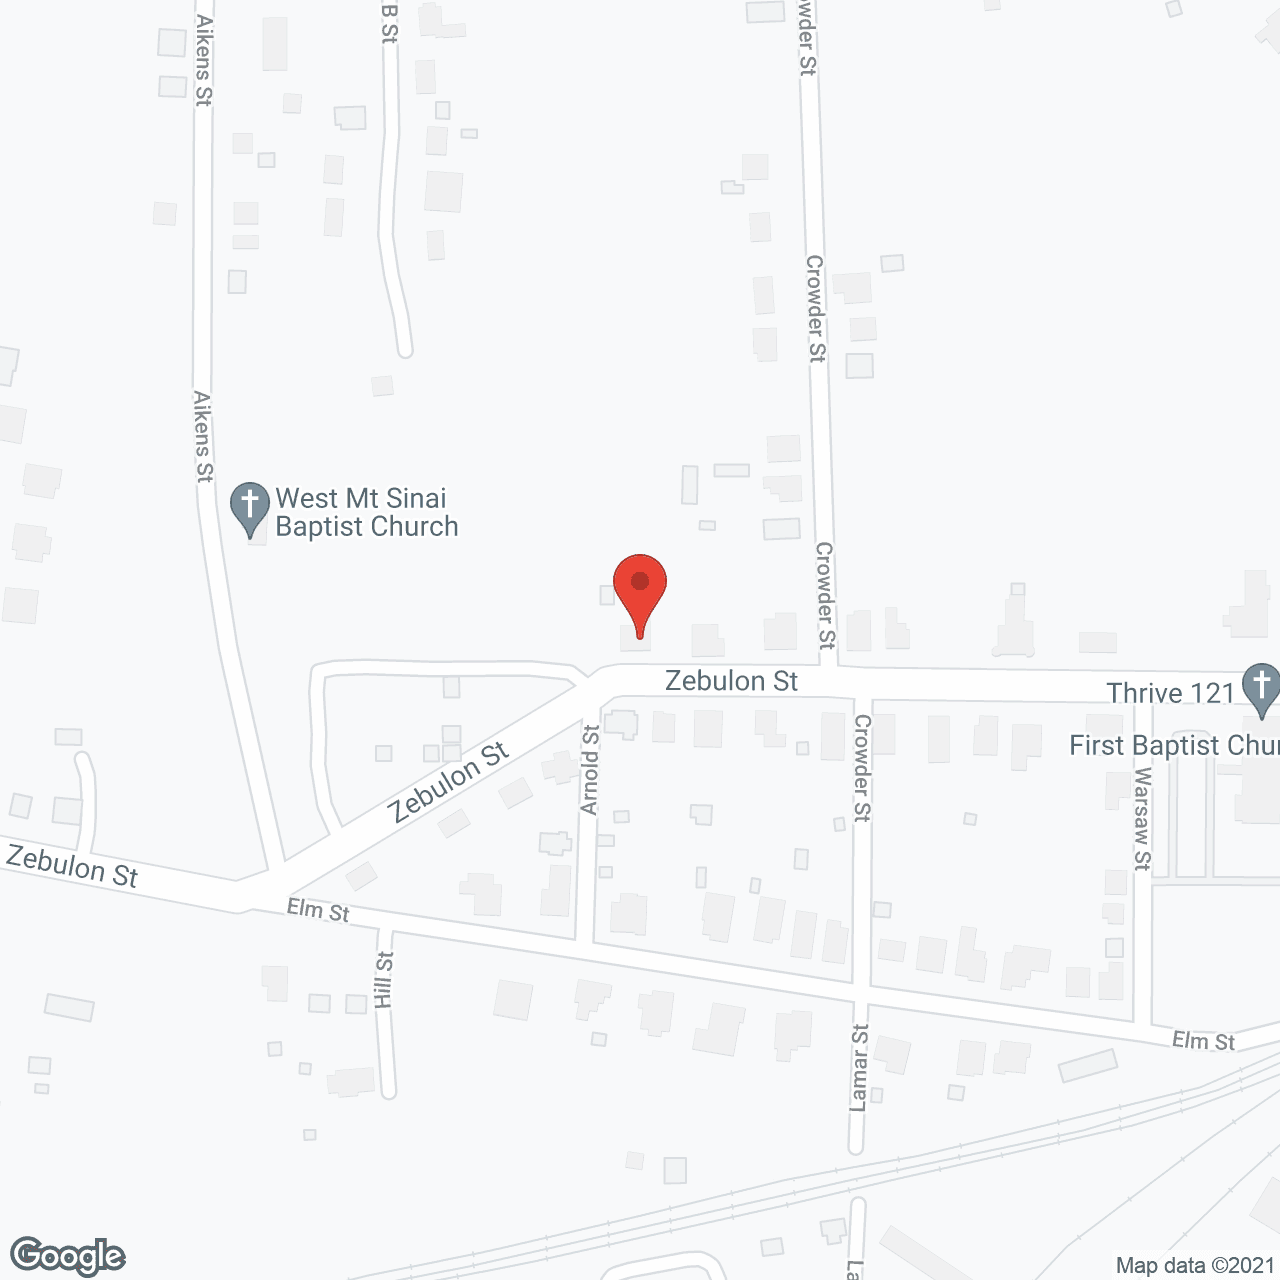 Rock of Ages Care Home in google map